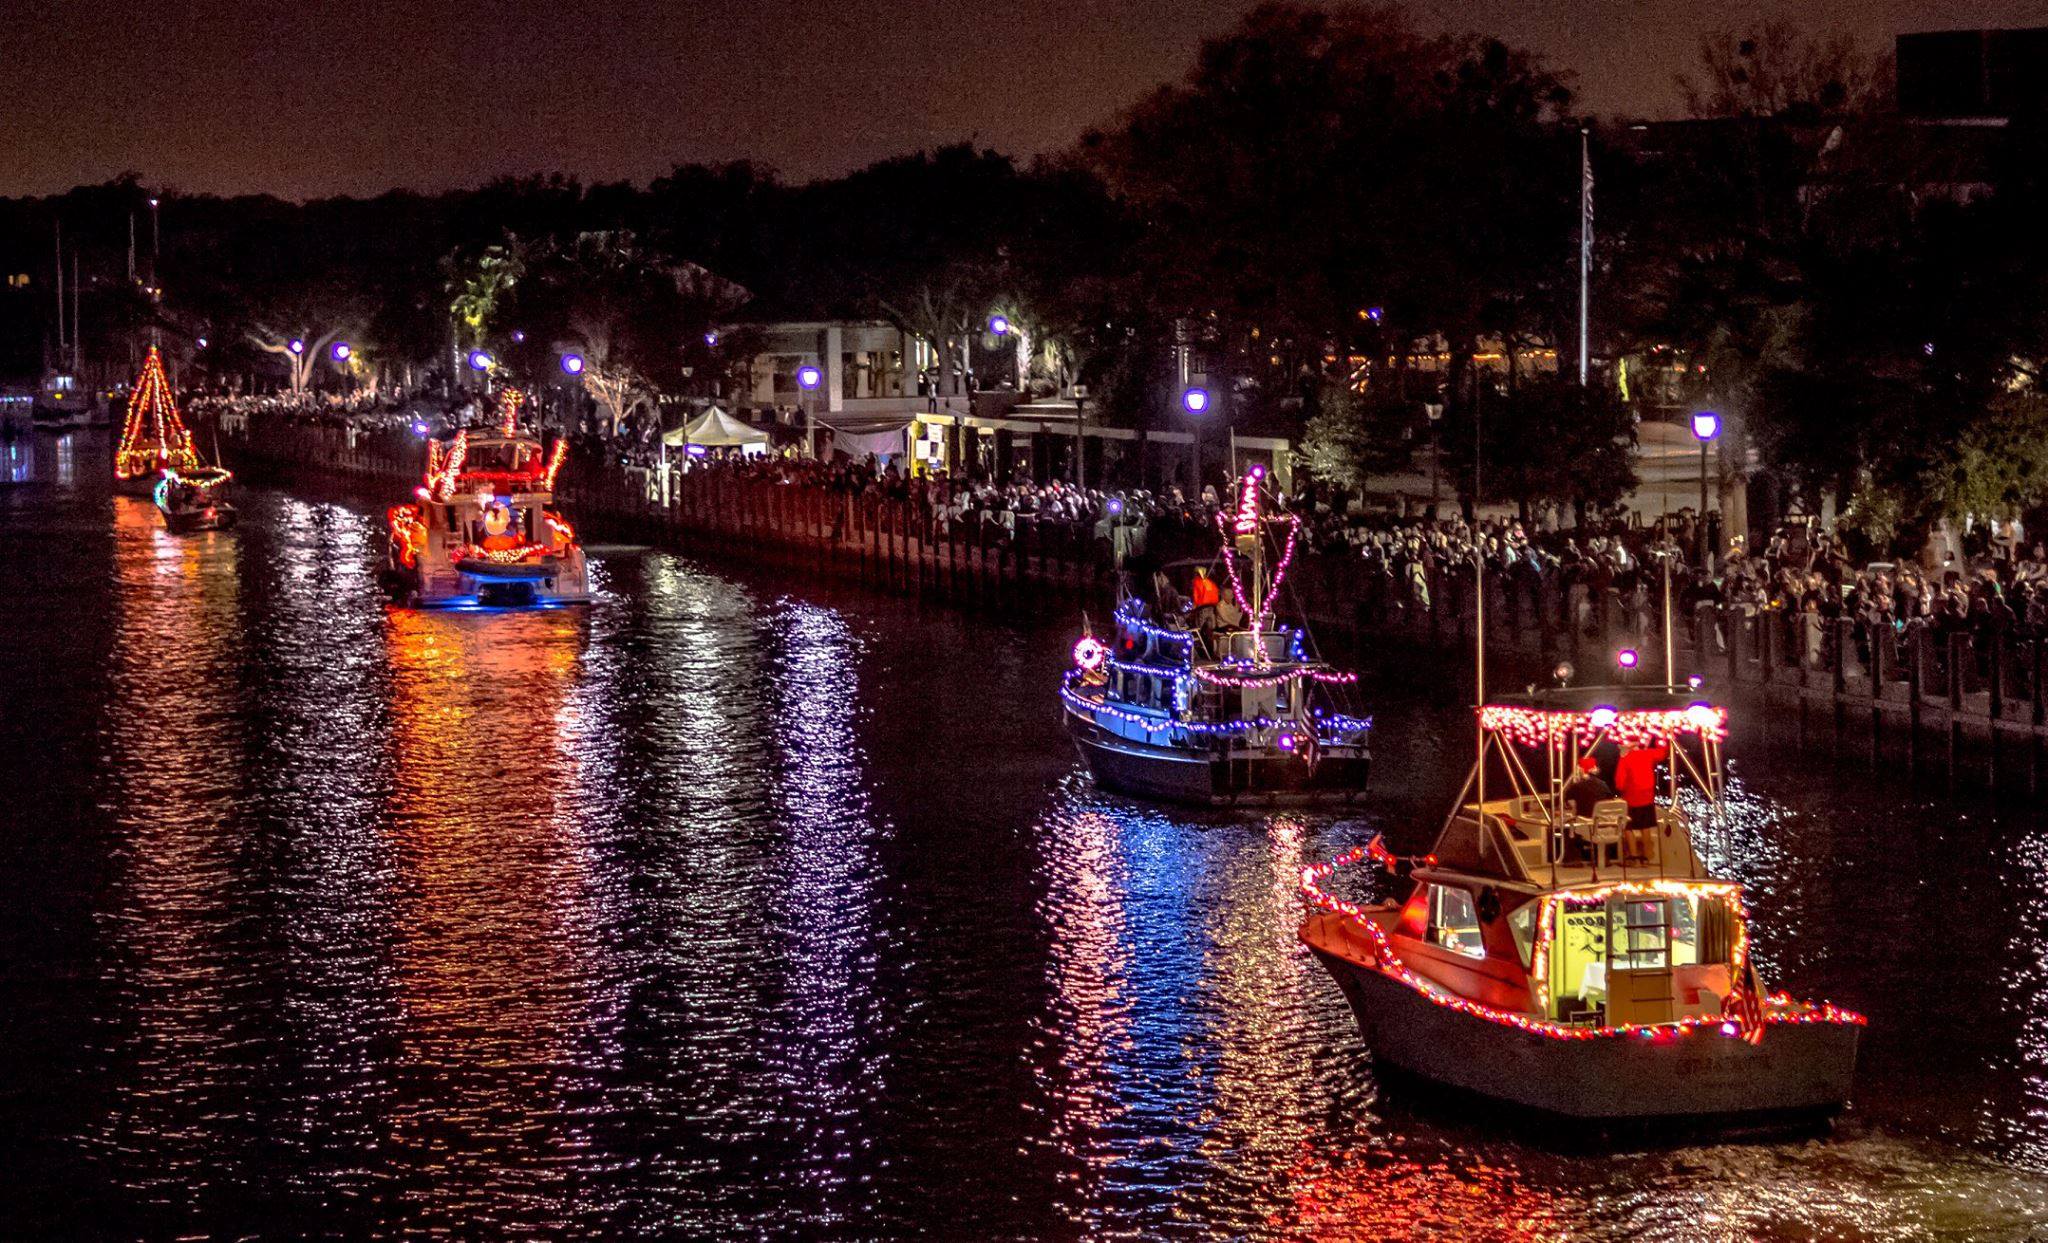 Beaufort's Night on the Town holiday weekend is back